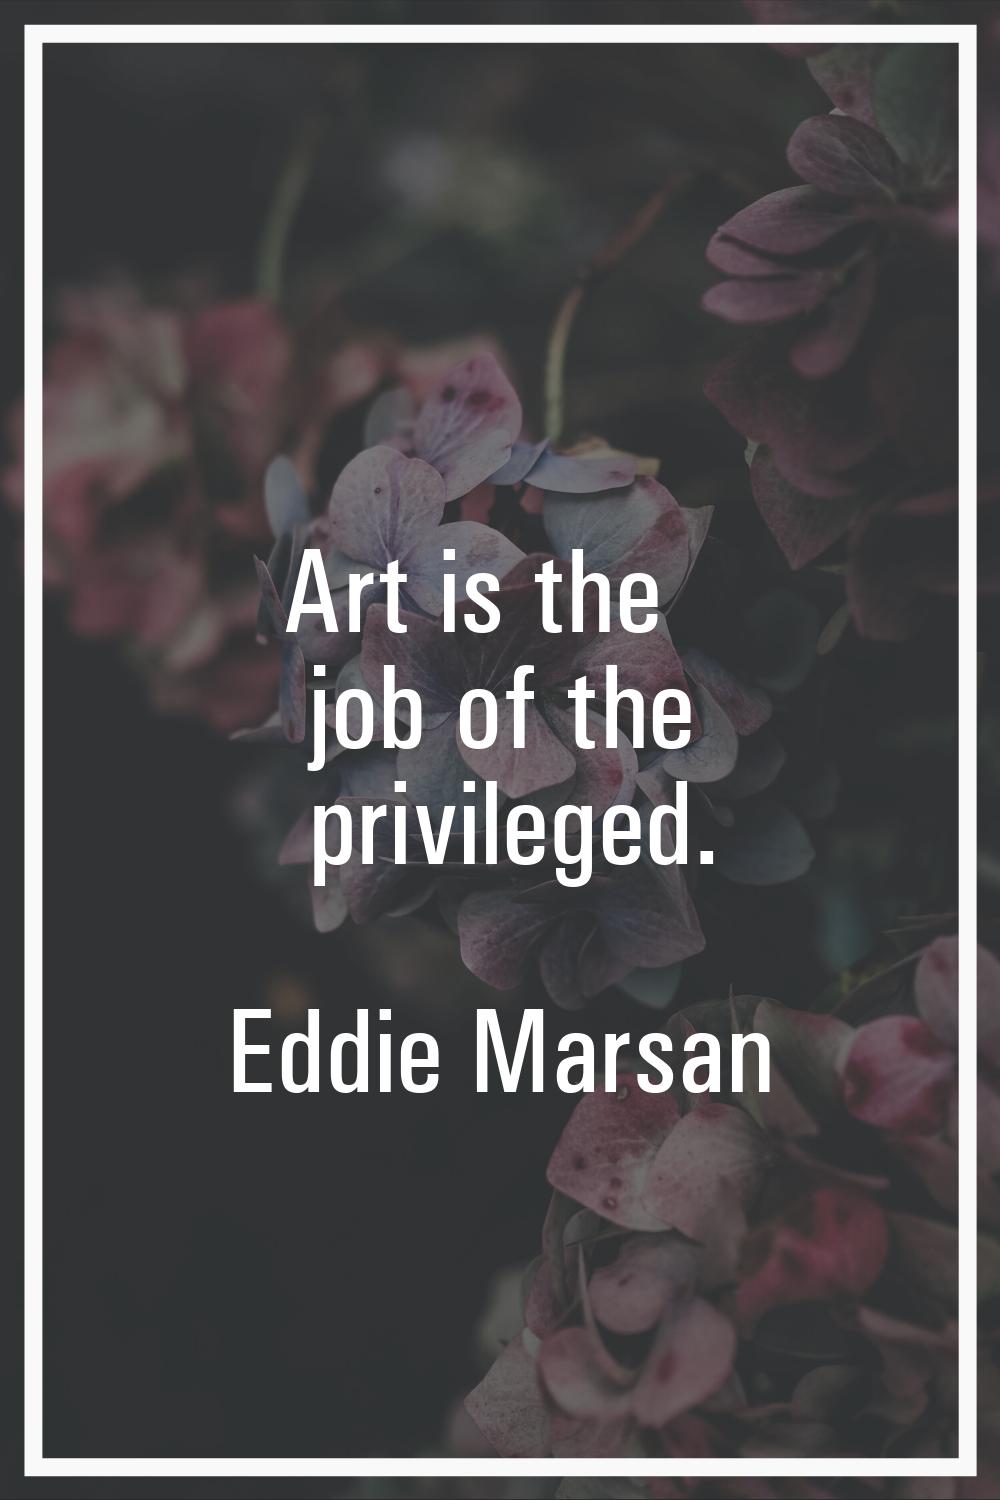 Art is the job of the privileged.